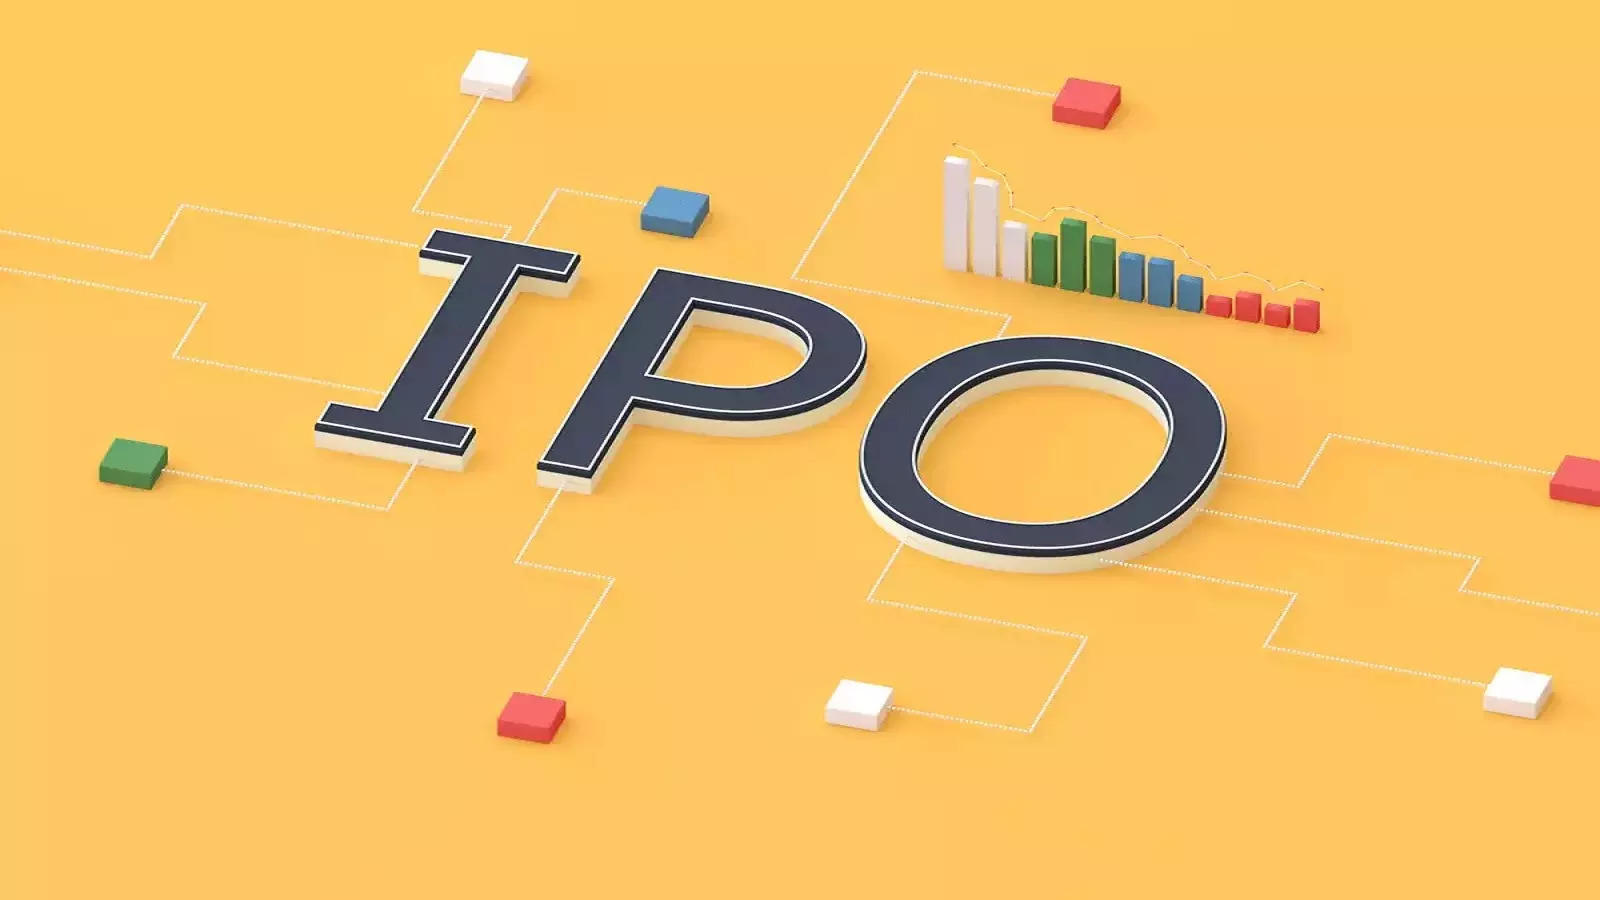 Office-sharing startup Awfis to launch IPO on May 22 